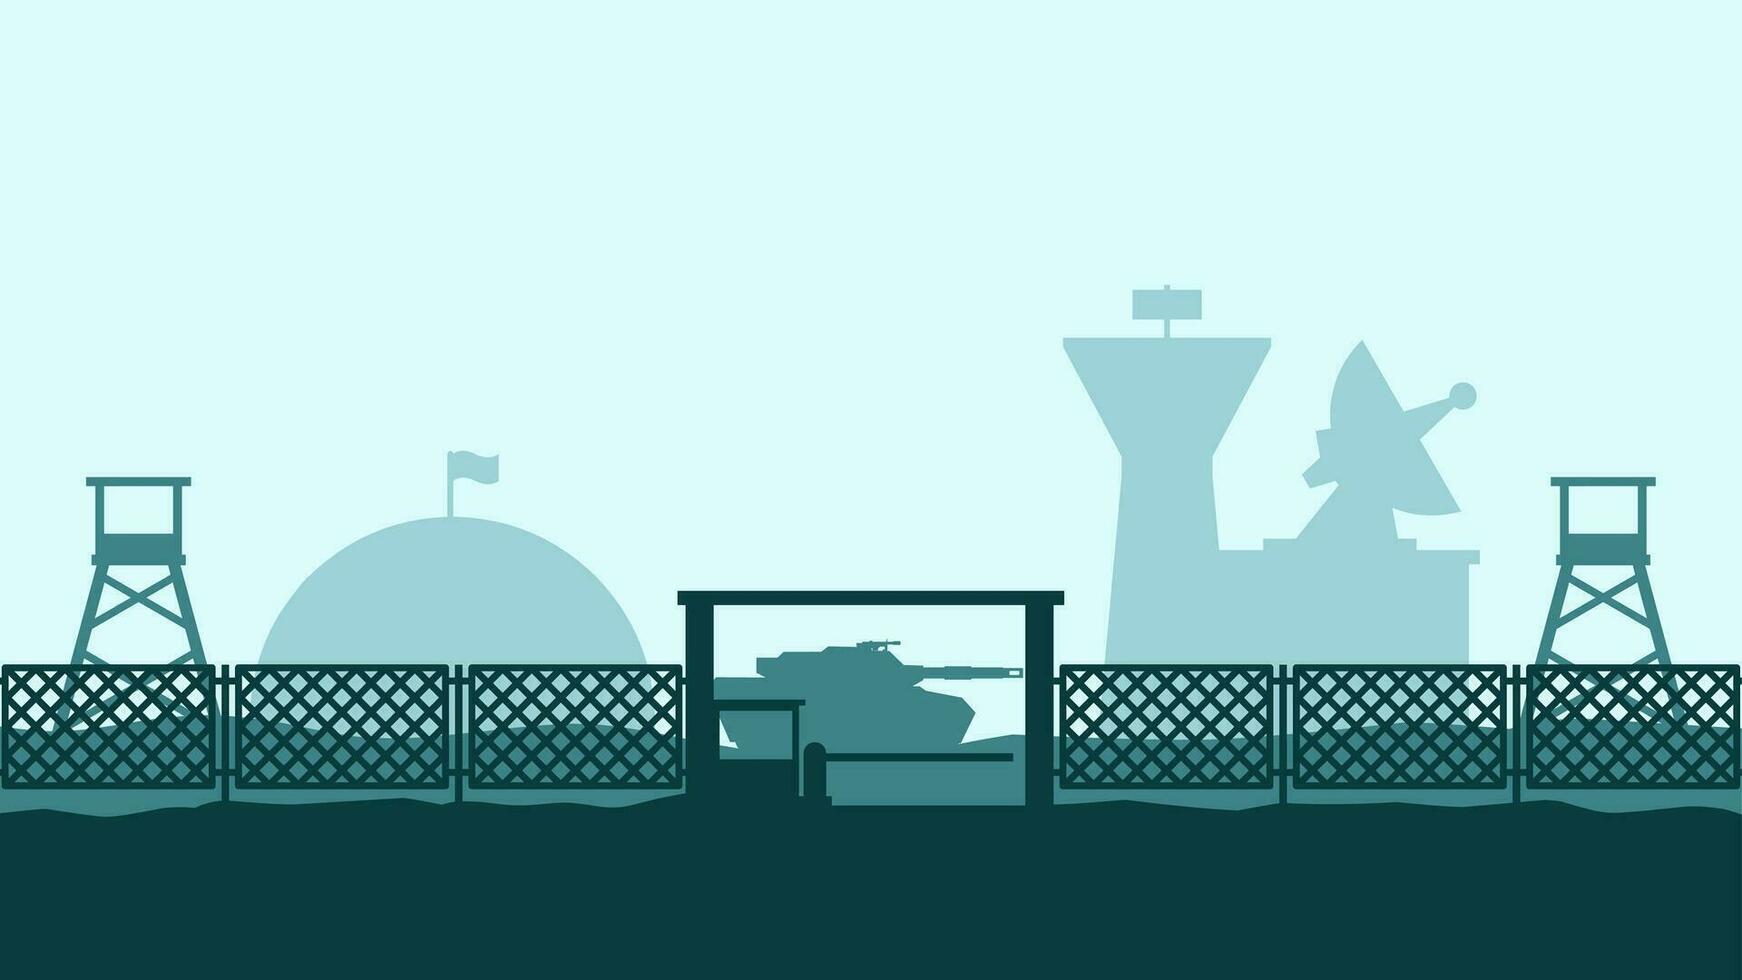 Vector illustration of military base landscape. Landscape silhouette of military base gate. Military landscape for background, wallpaper or landing page. Army training field with tank and guard post